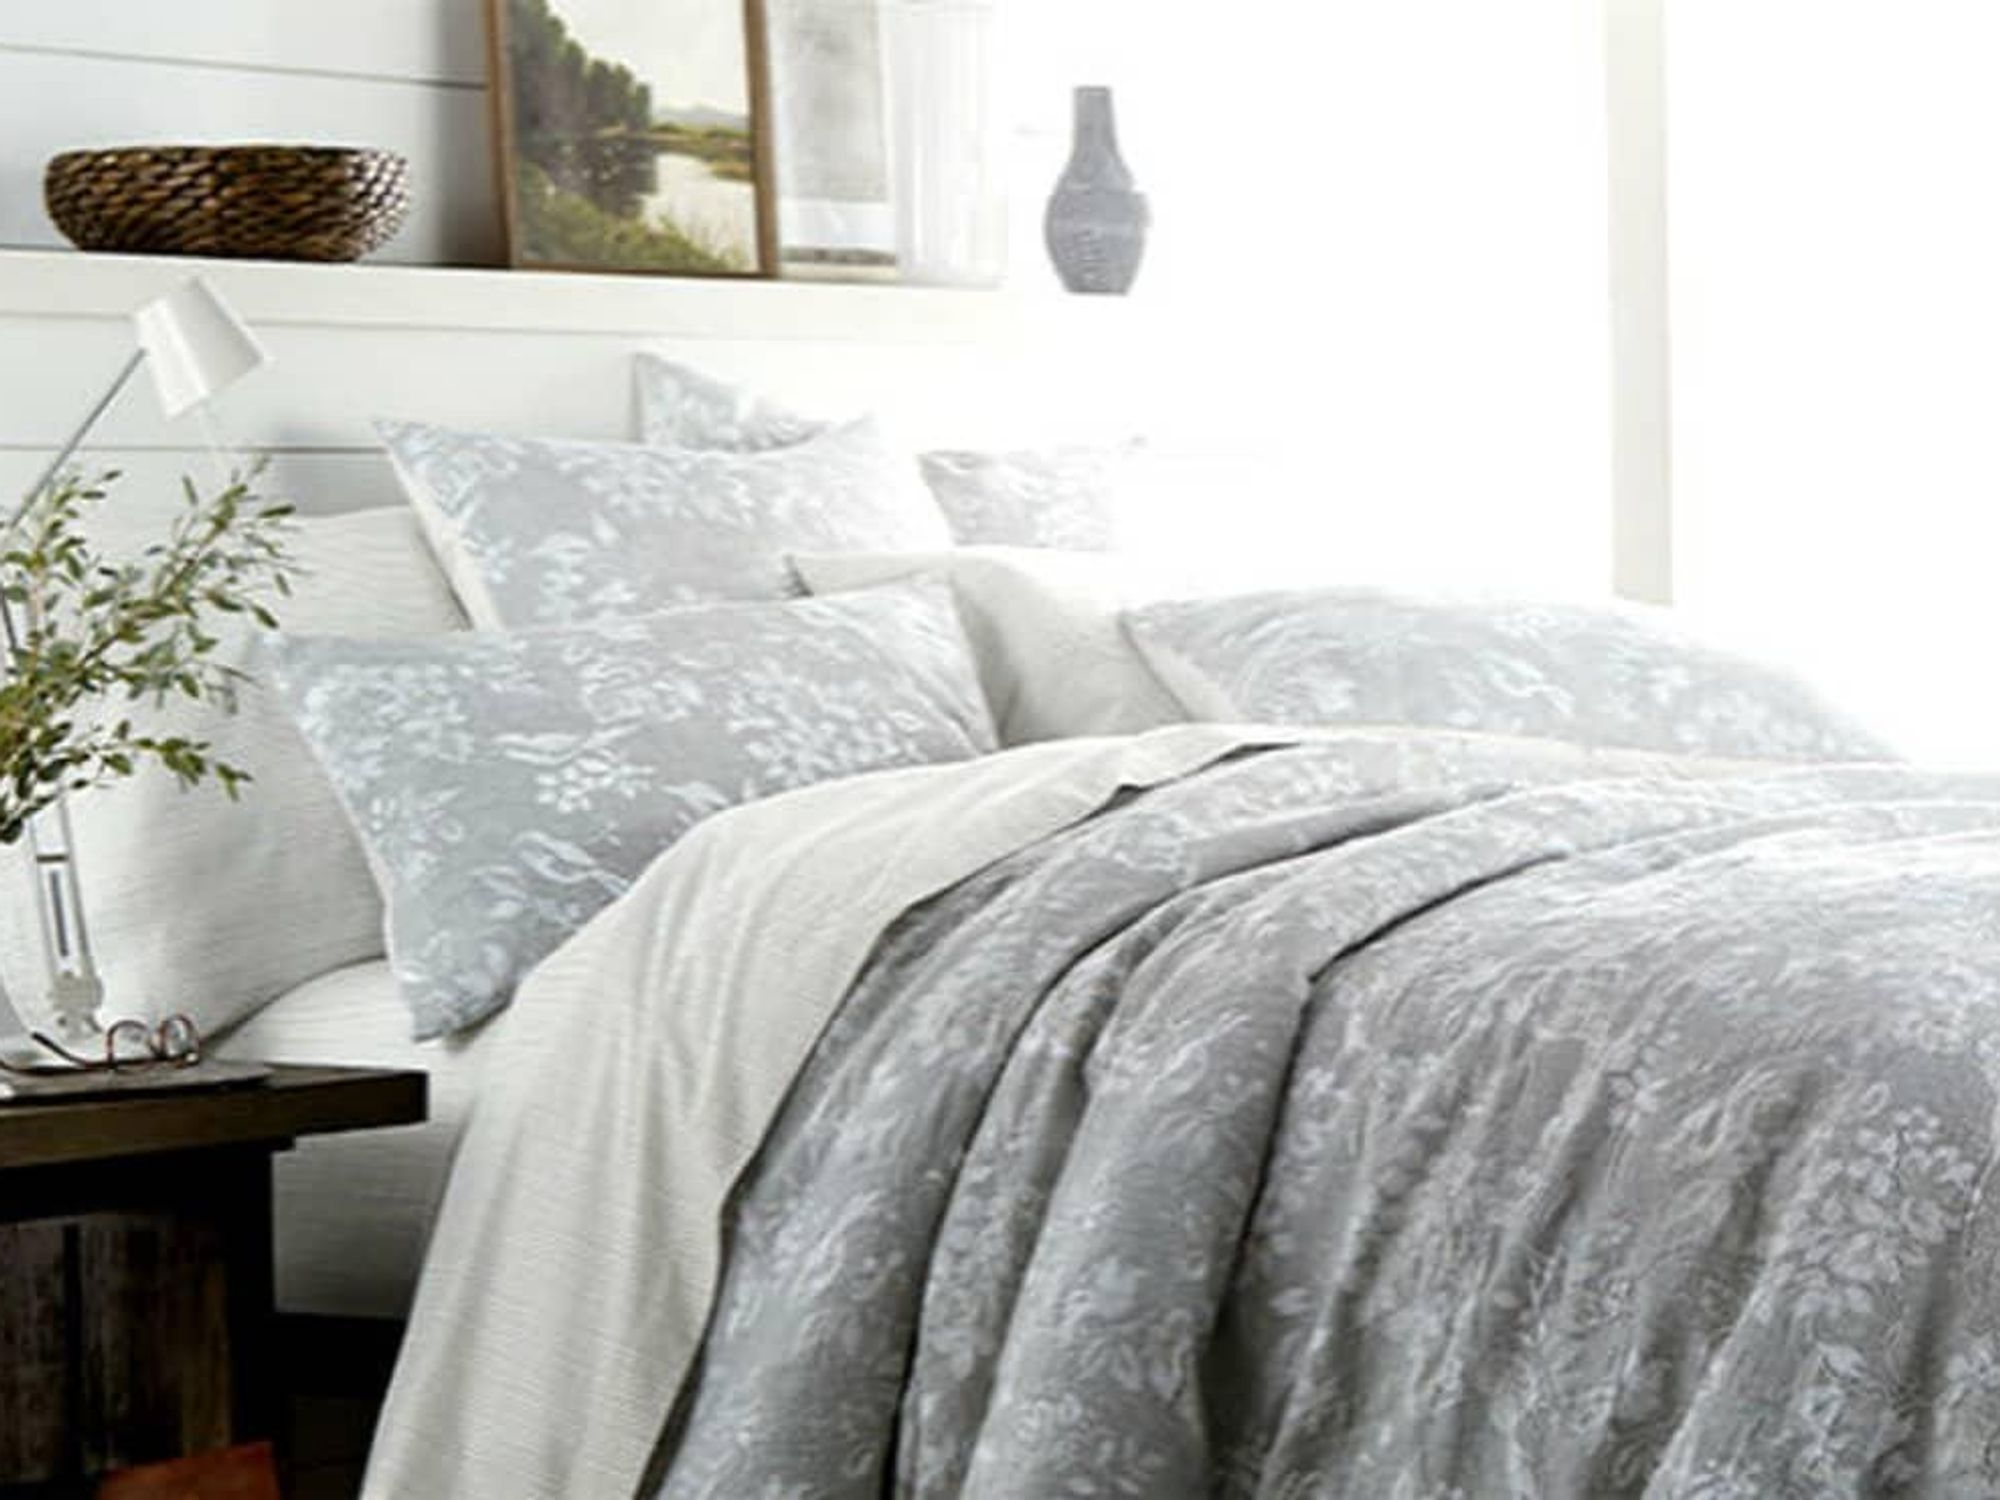 Plano-based JCPenney bats down bankruptcy with plush new bedding collection  - CultureMap Dallas